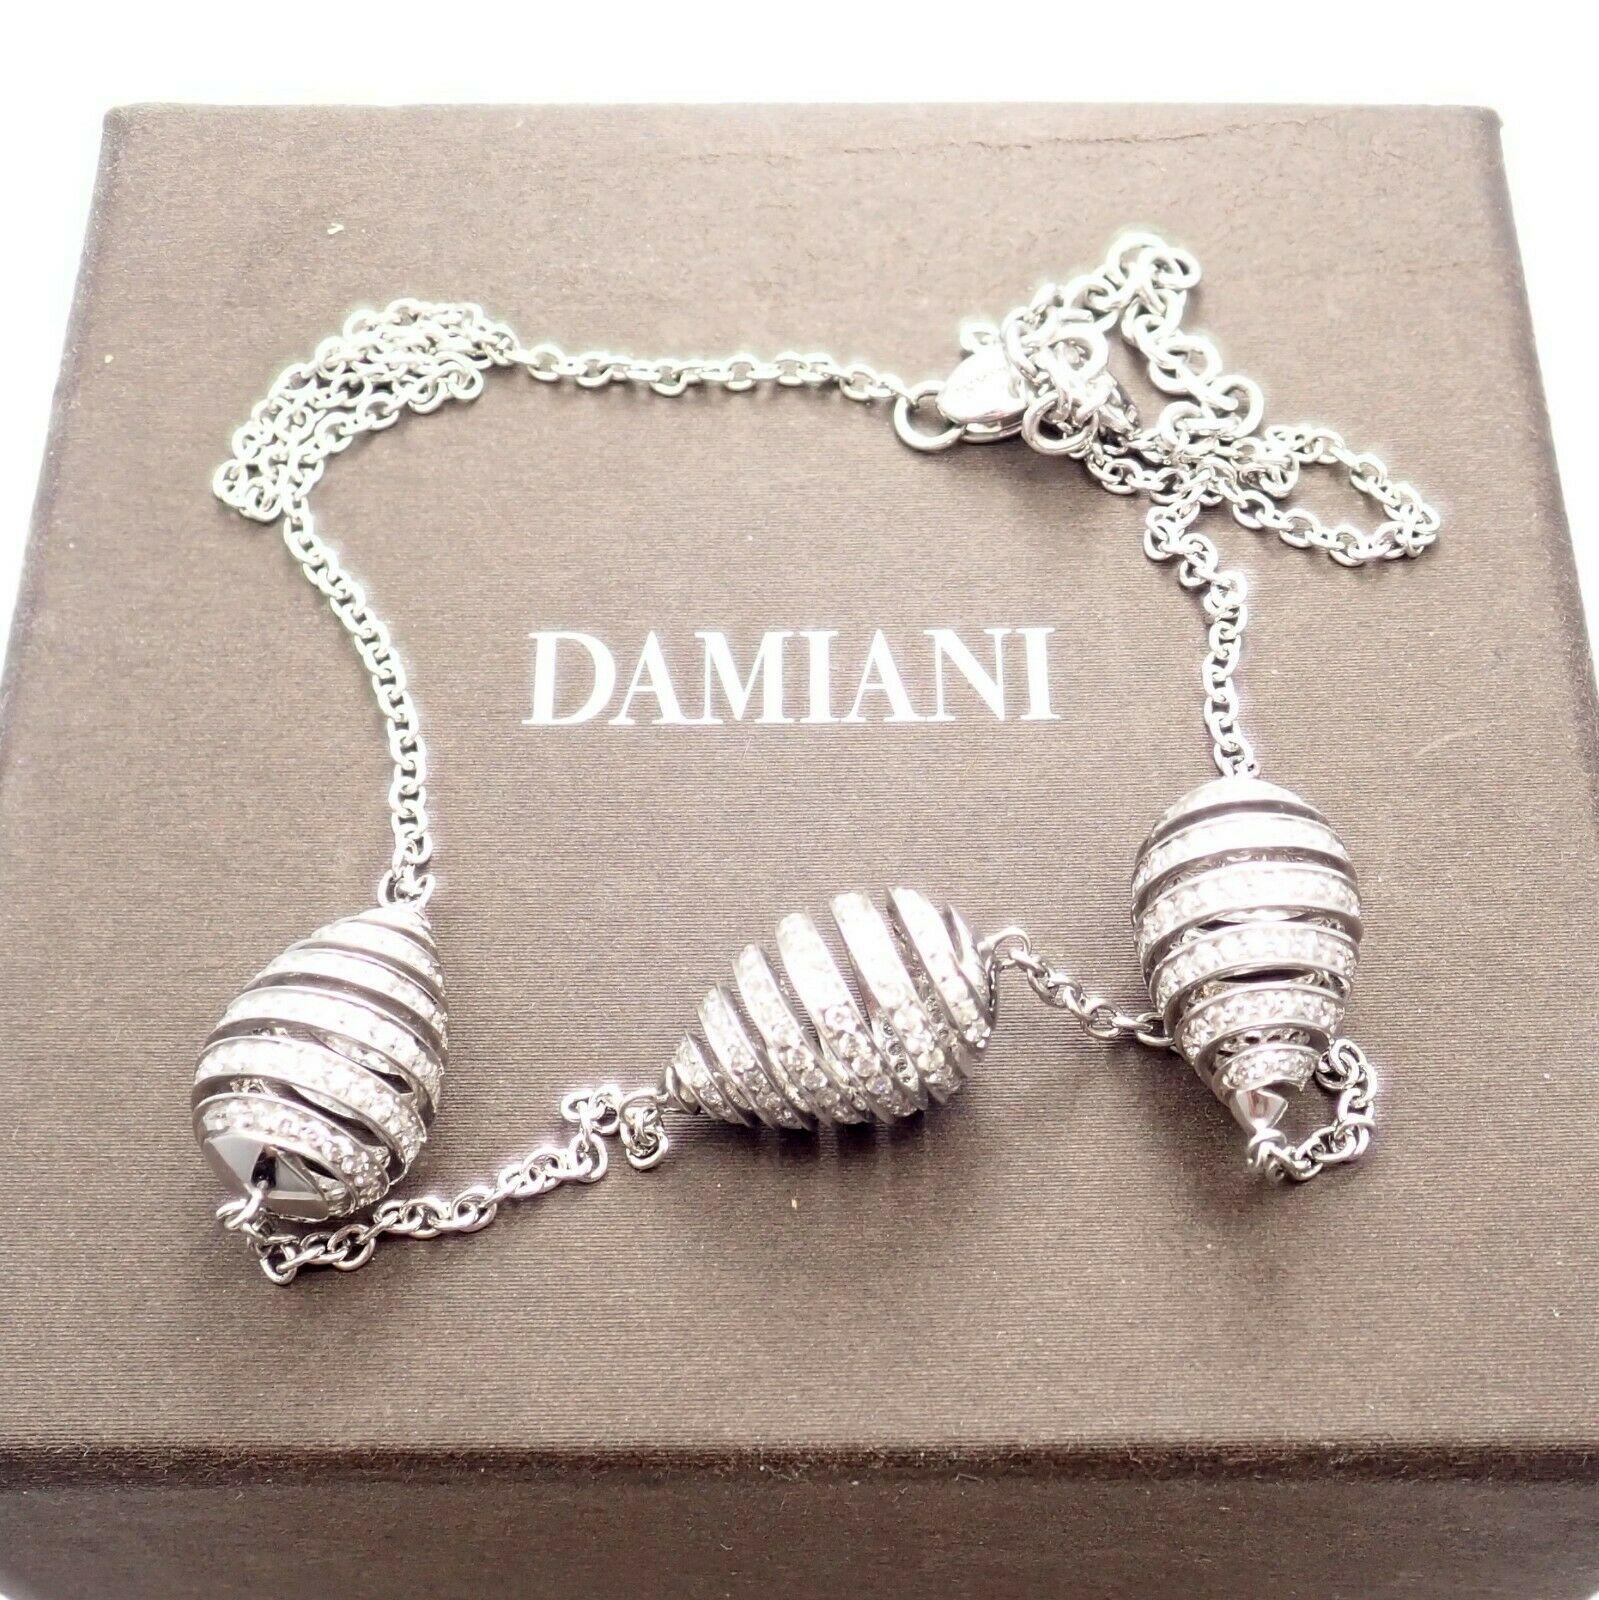 Damiani Diamond Spiral Teardrop 3 Motif White Gold Necklace In New Condition For Sale In Holland, PA